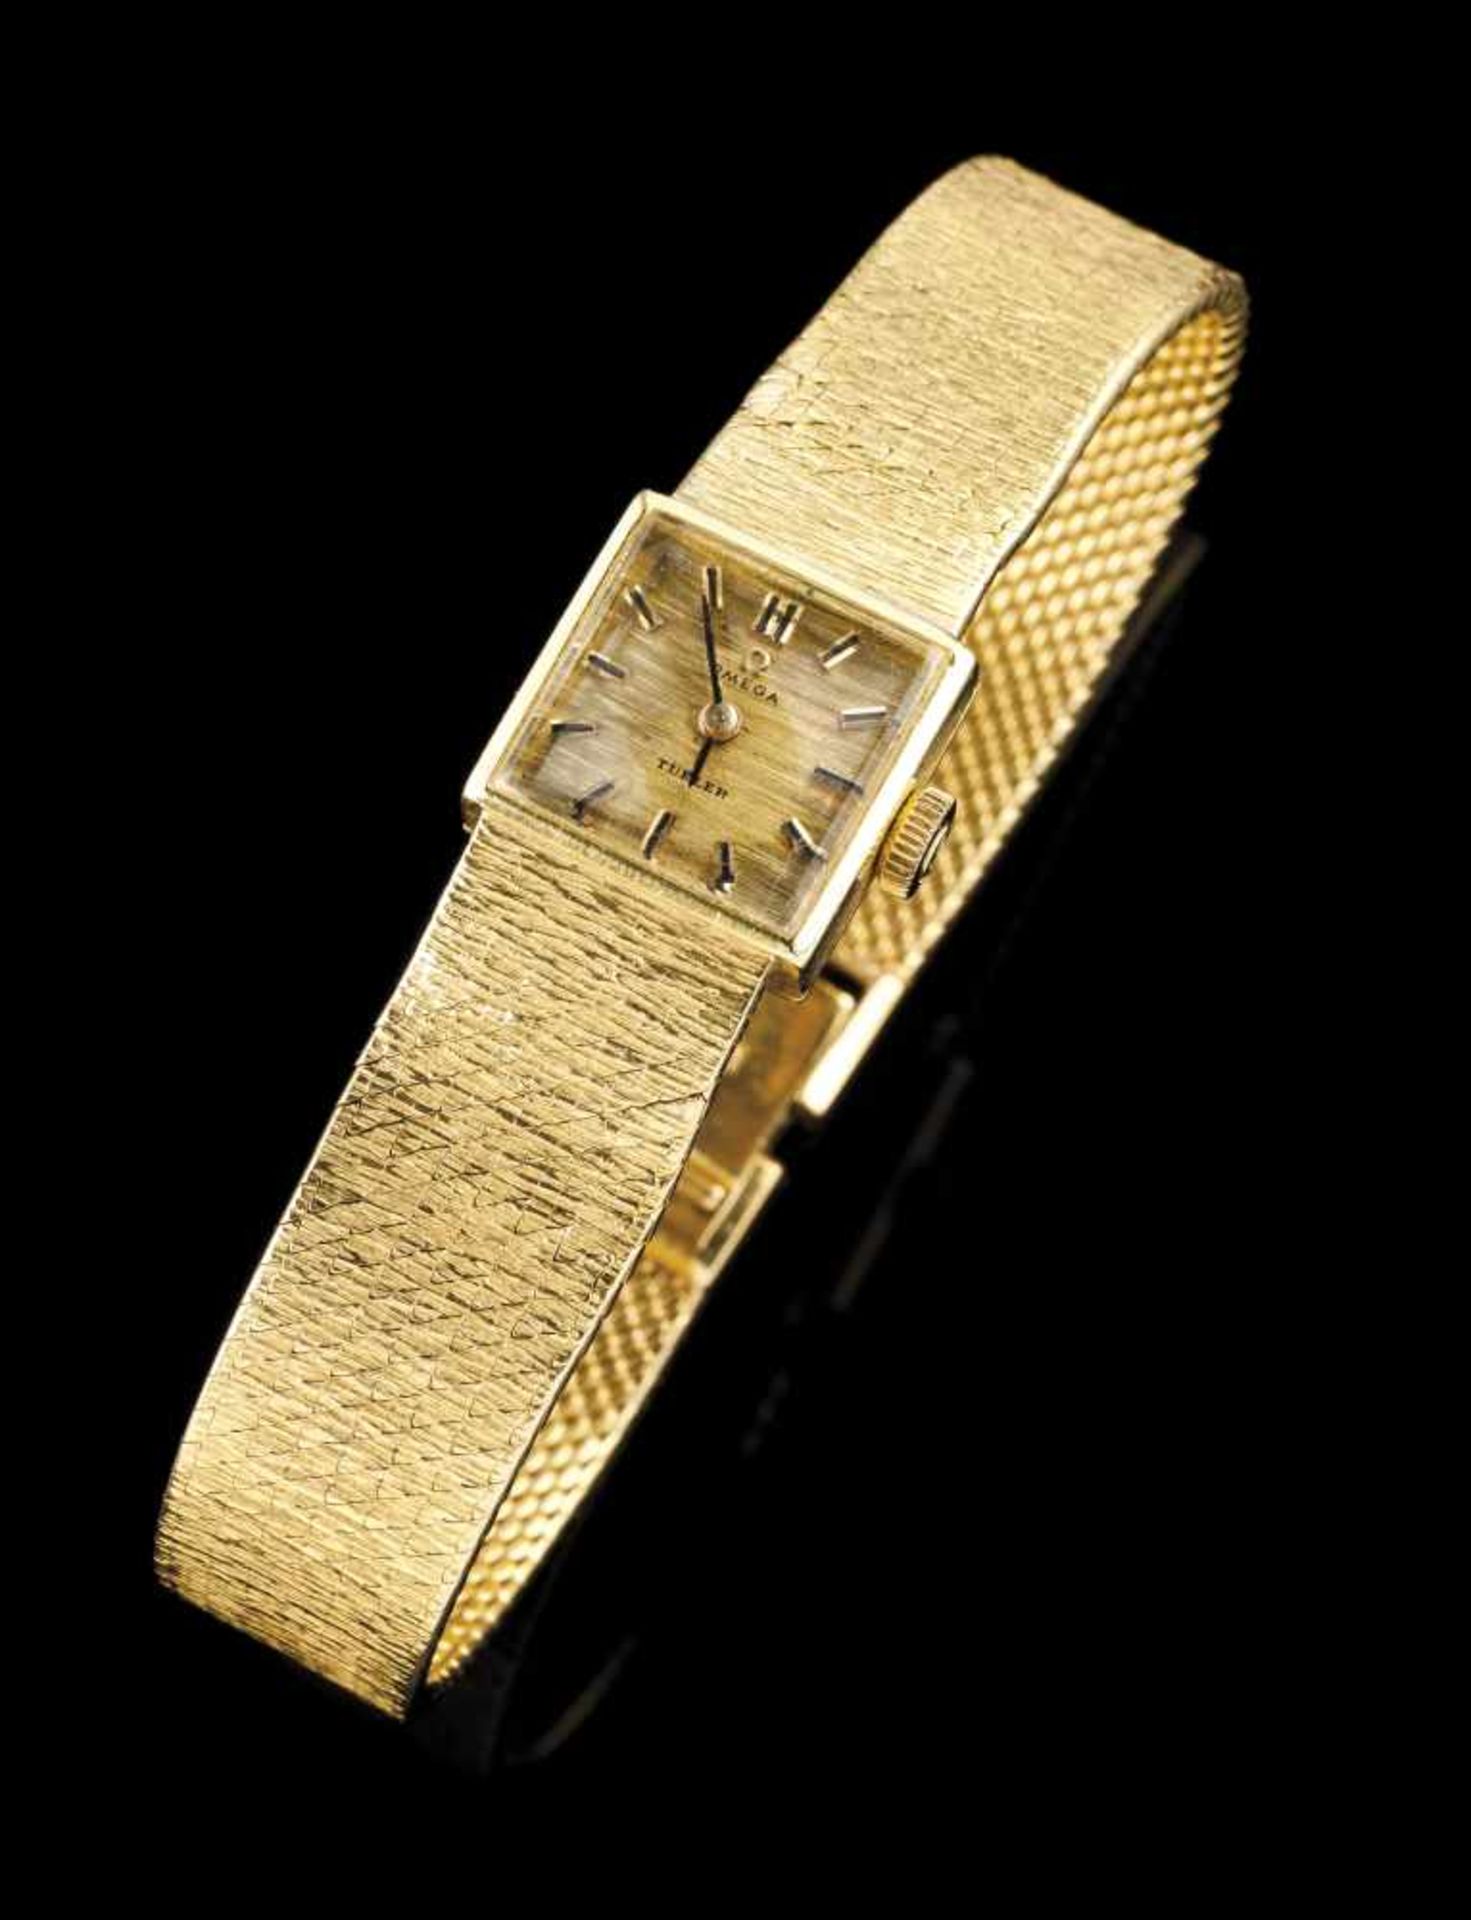 An Omega watchGoldTurner ladies model of mechanic movementSquare face and textured stra